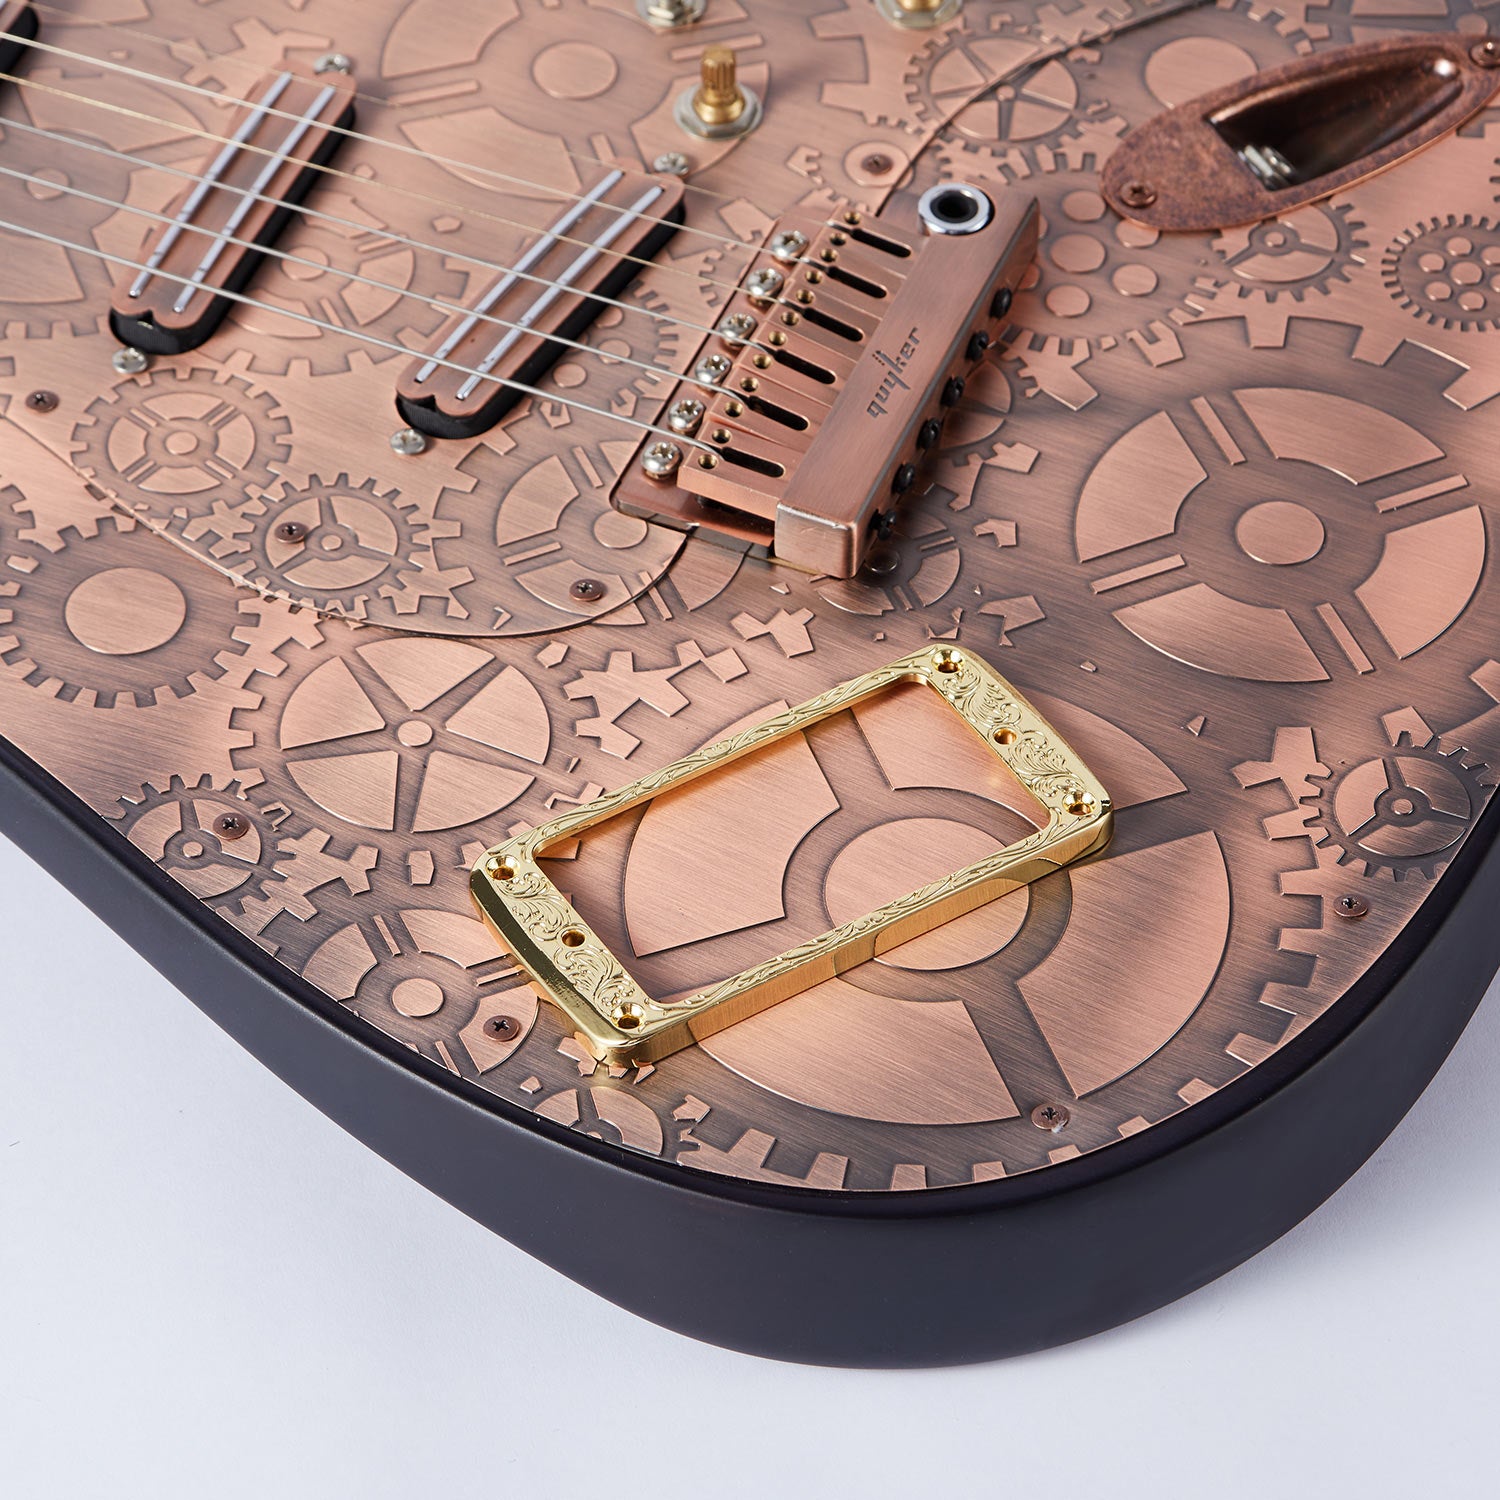 A sturdy and adaptable pickup frame engineered for various electric guitar styles.